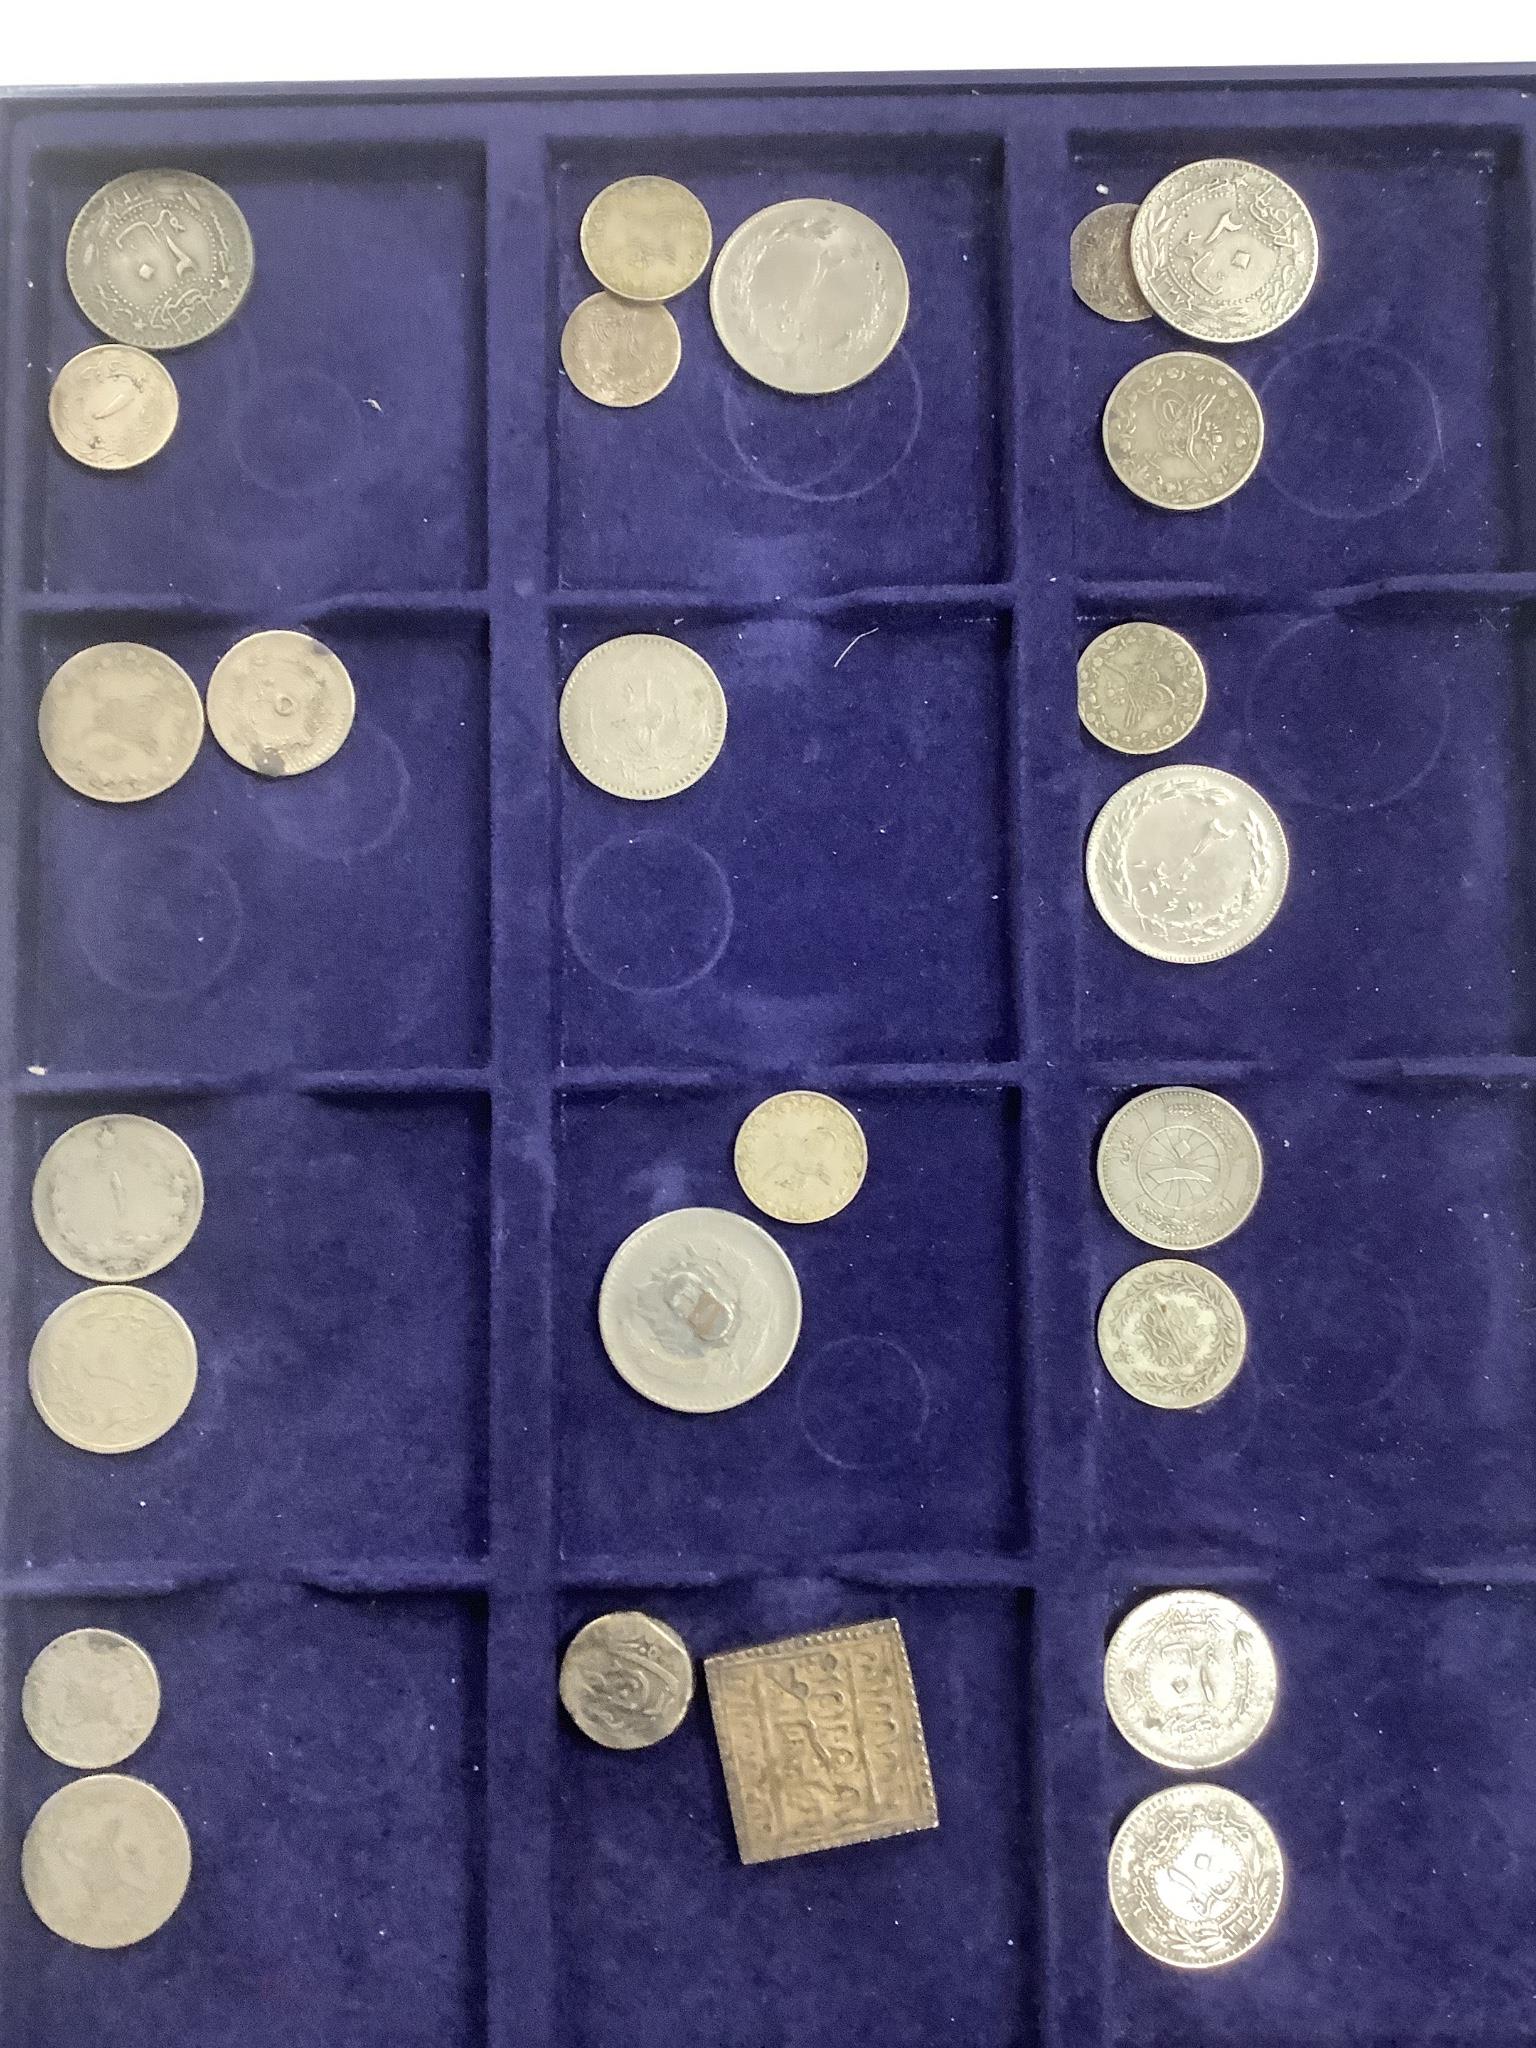 Ottoman Empire and Islamic coins, 19th/20th century, silver and bronze coinage, 12 trays - Image 2 of 13